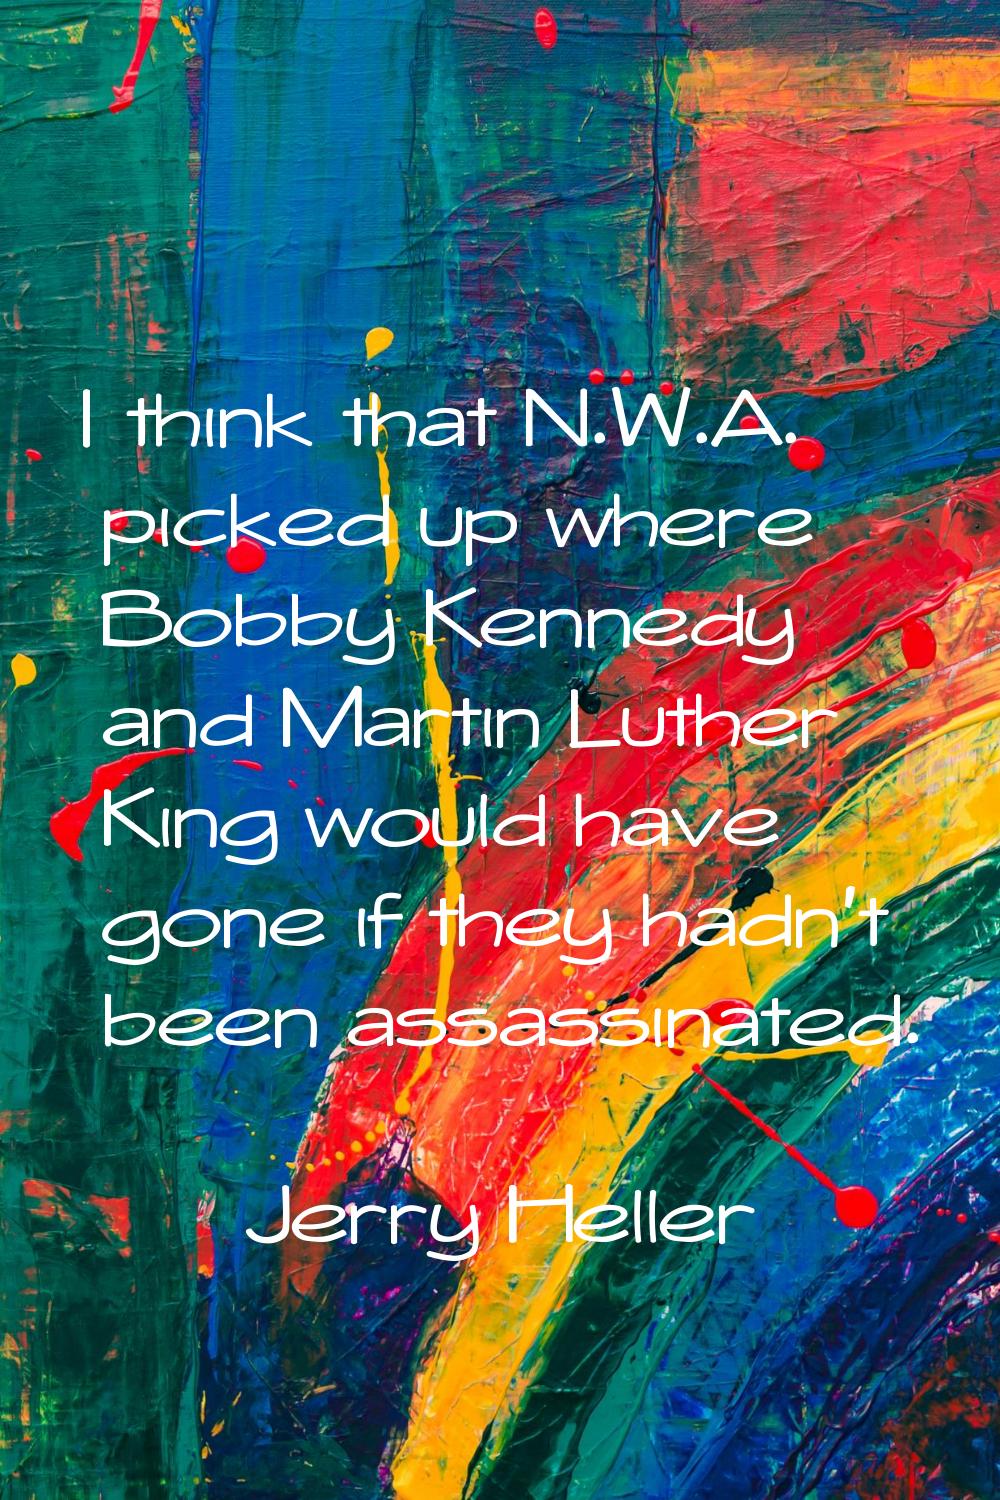 I think that N.W.A. picked up where Bobby Kennedy and Martin Luther King would have gone if they ha